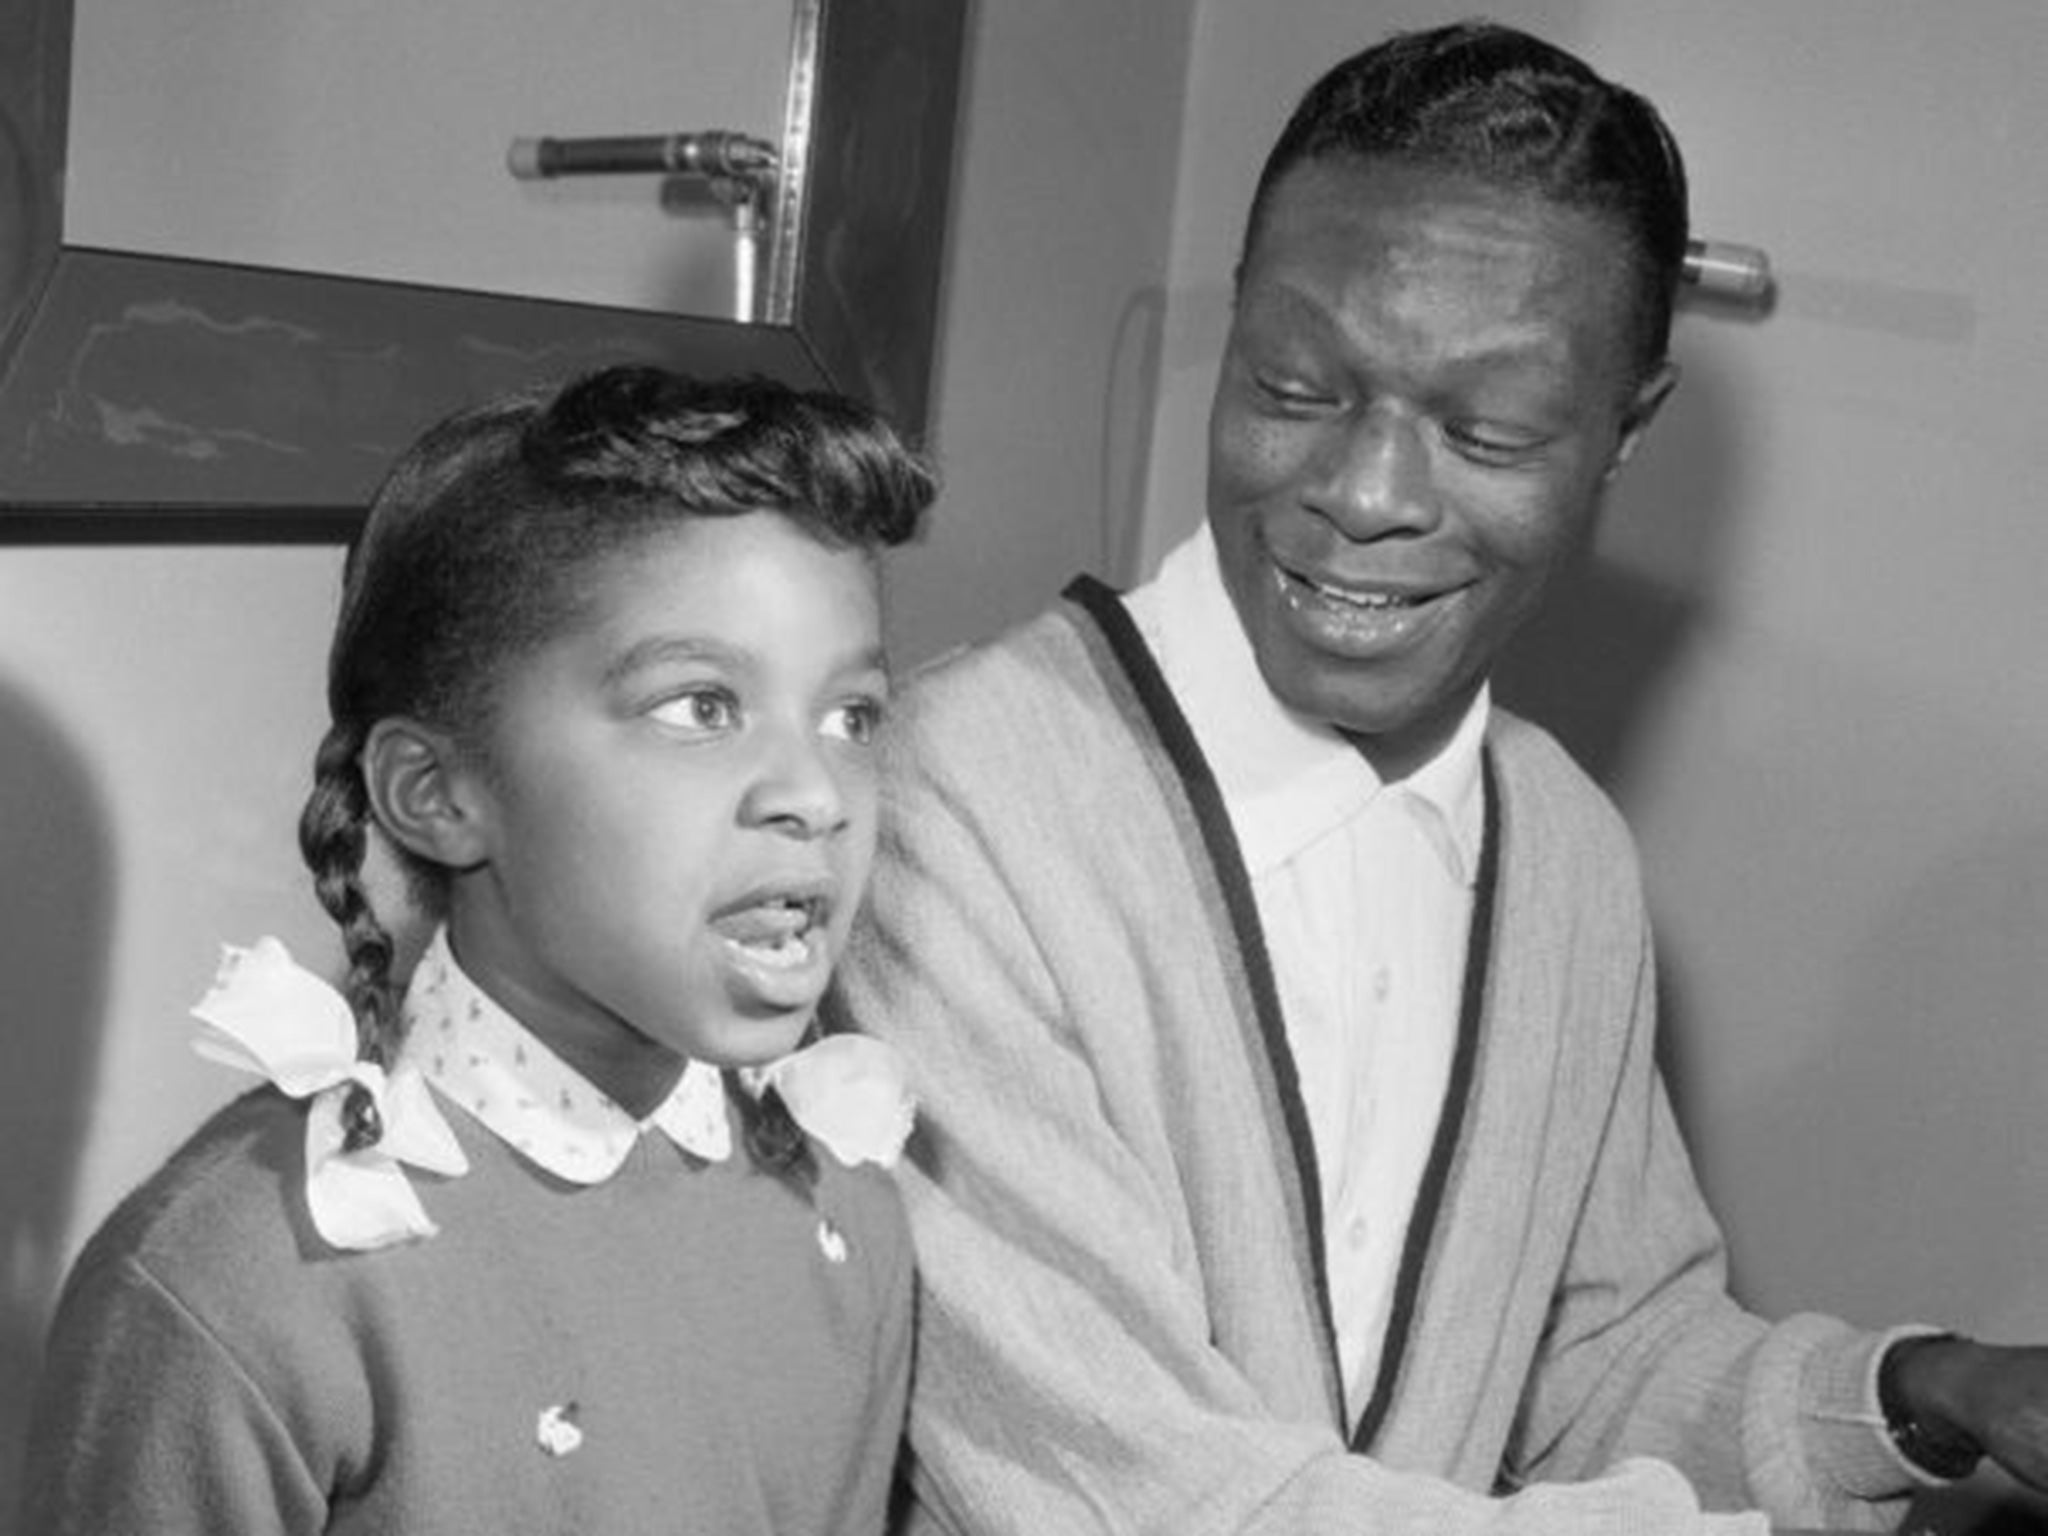 Natalie Cole at the age of 7 with father Nat 'King' Cole